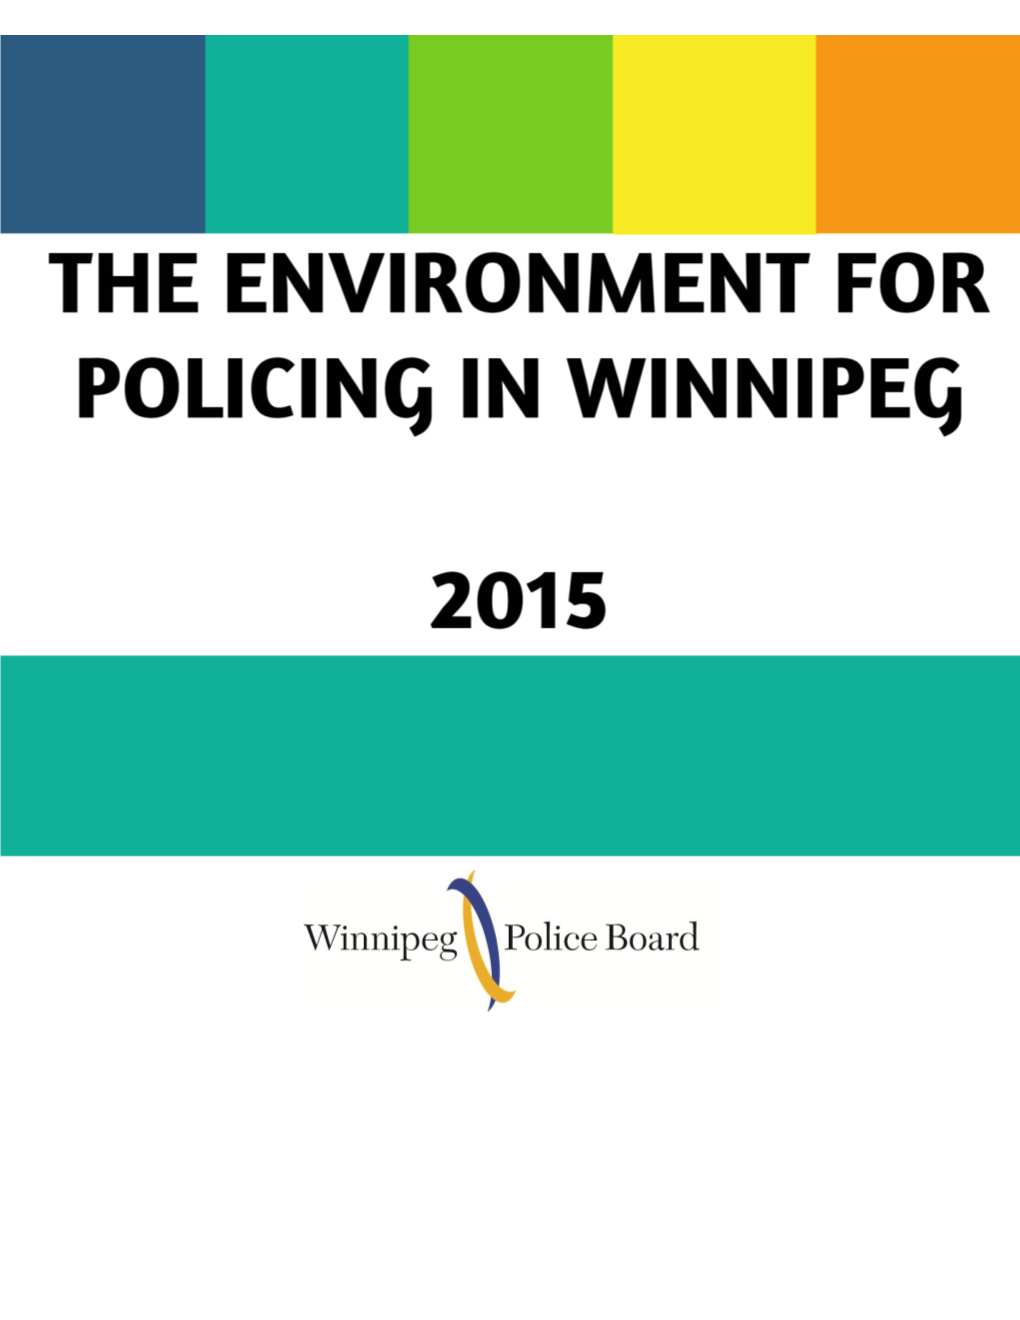 The Environment for Policing in Winnipeg (2015)